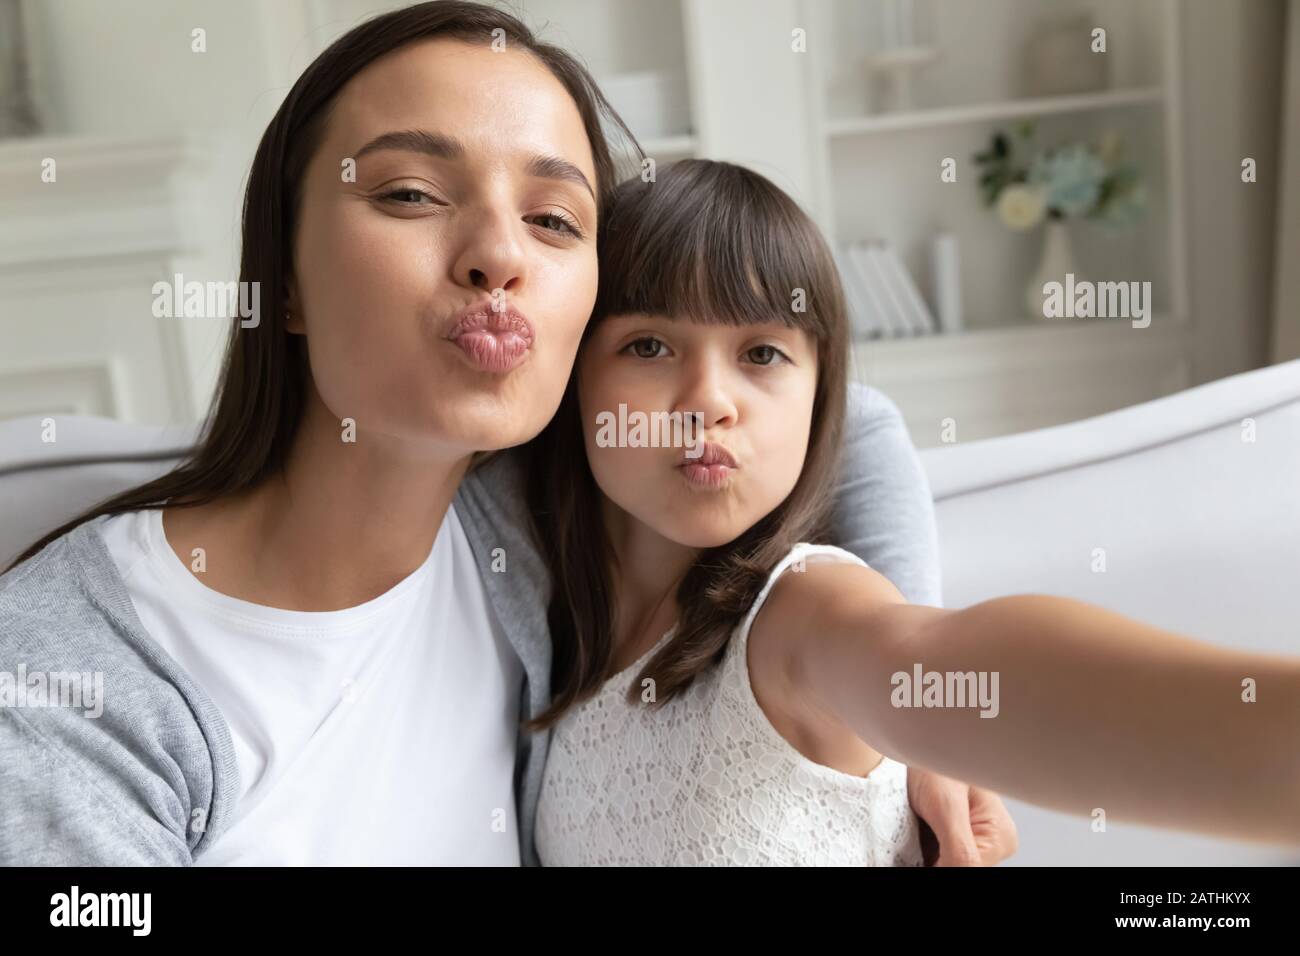 Funny young mom and preschooler daughter make selfie together Stock Photo